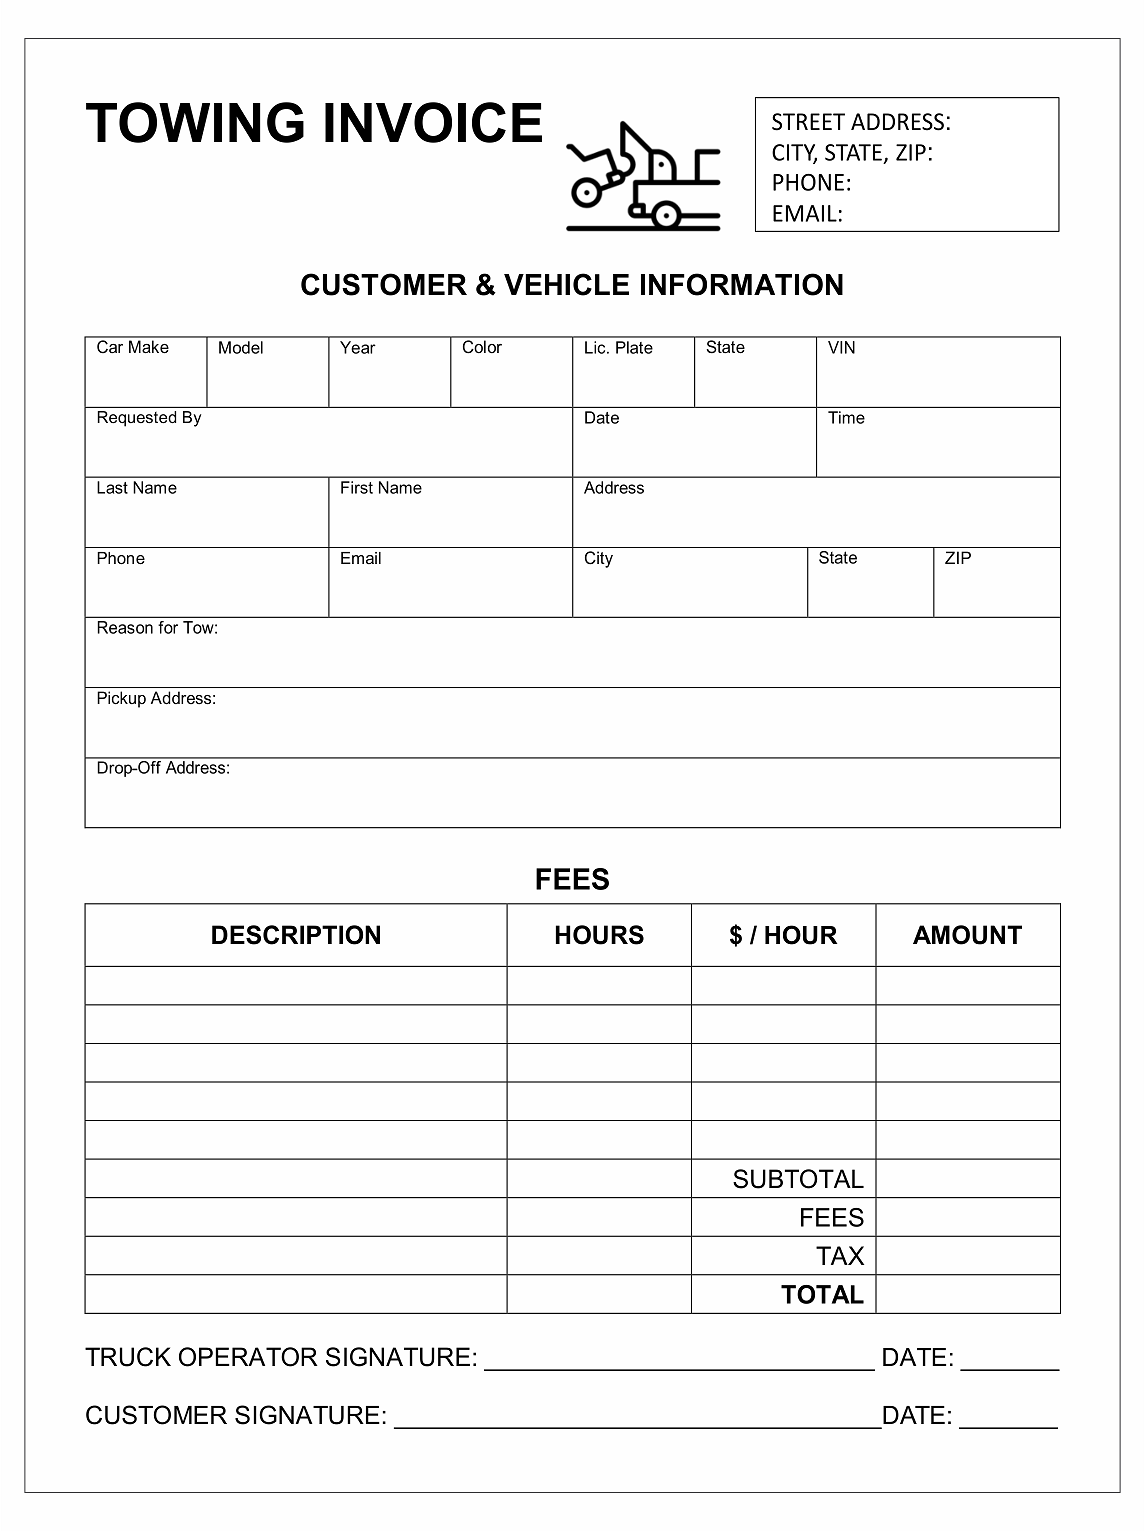 Custom Printed Carbonless Towing Invoices